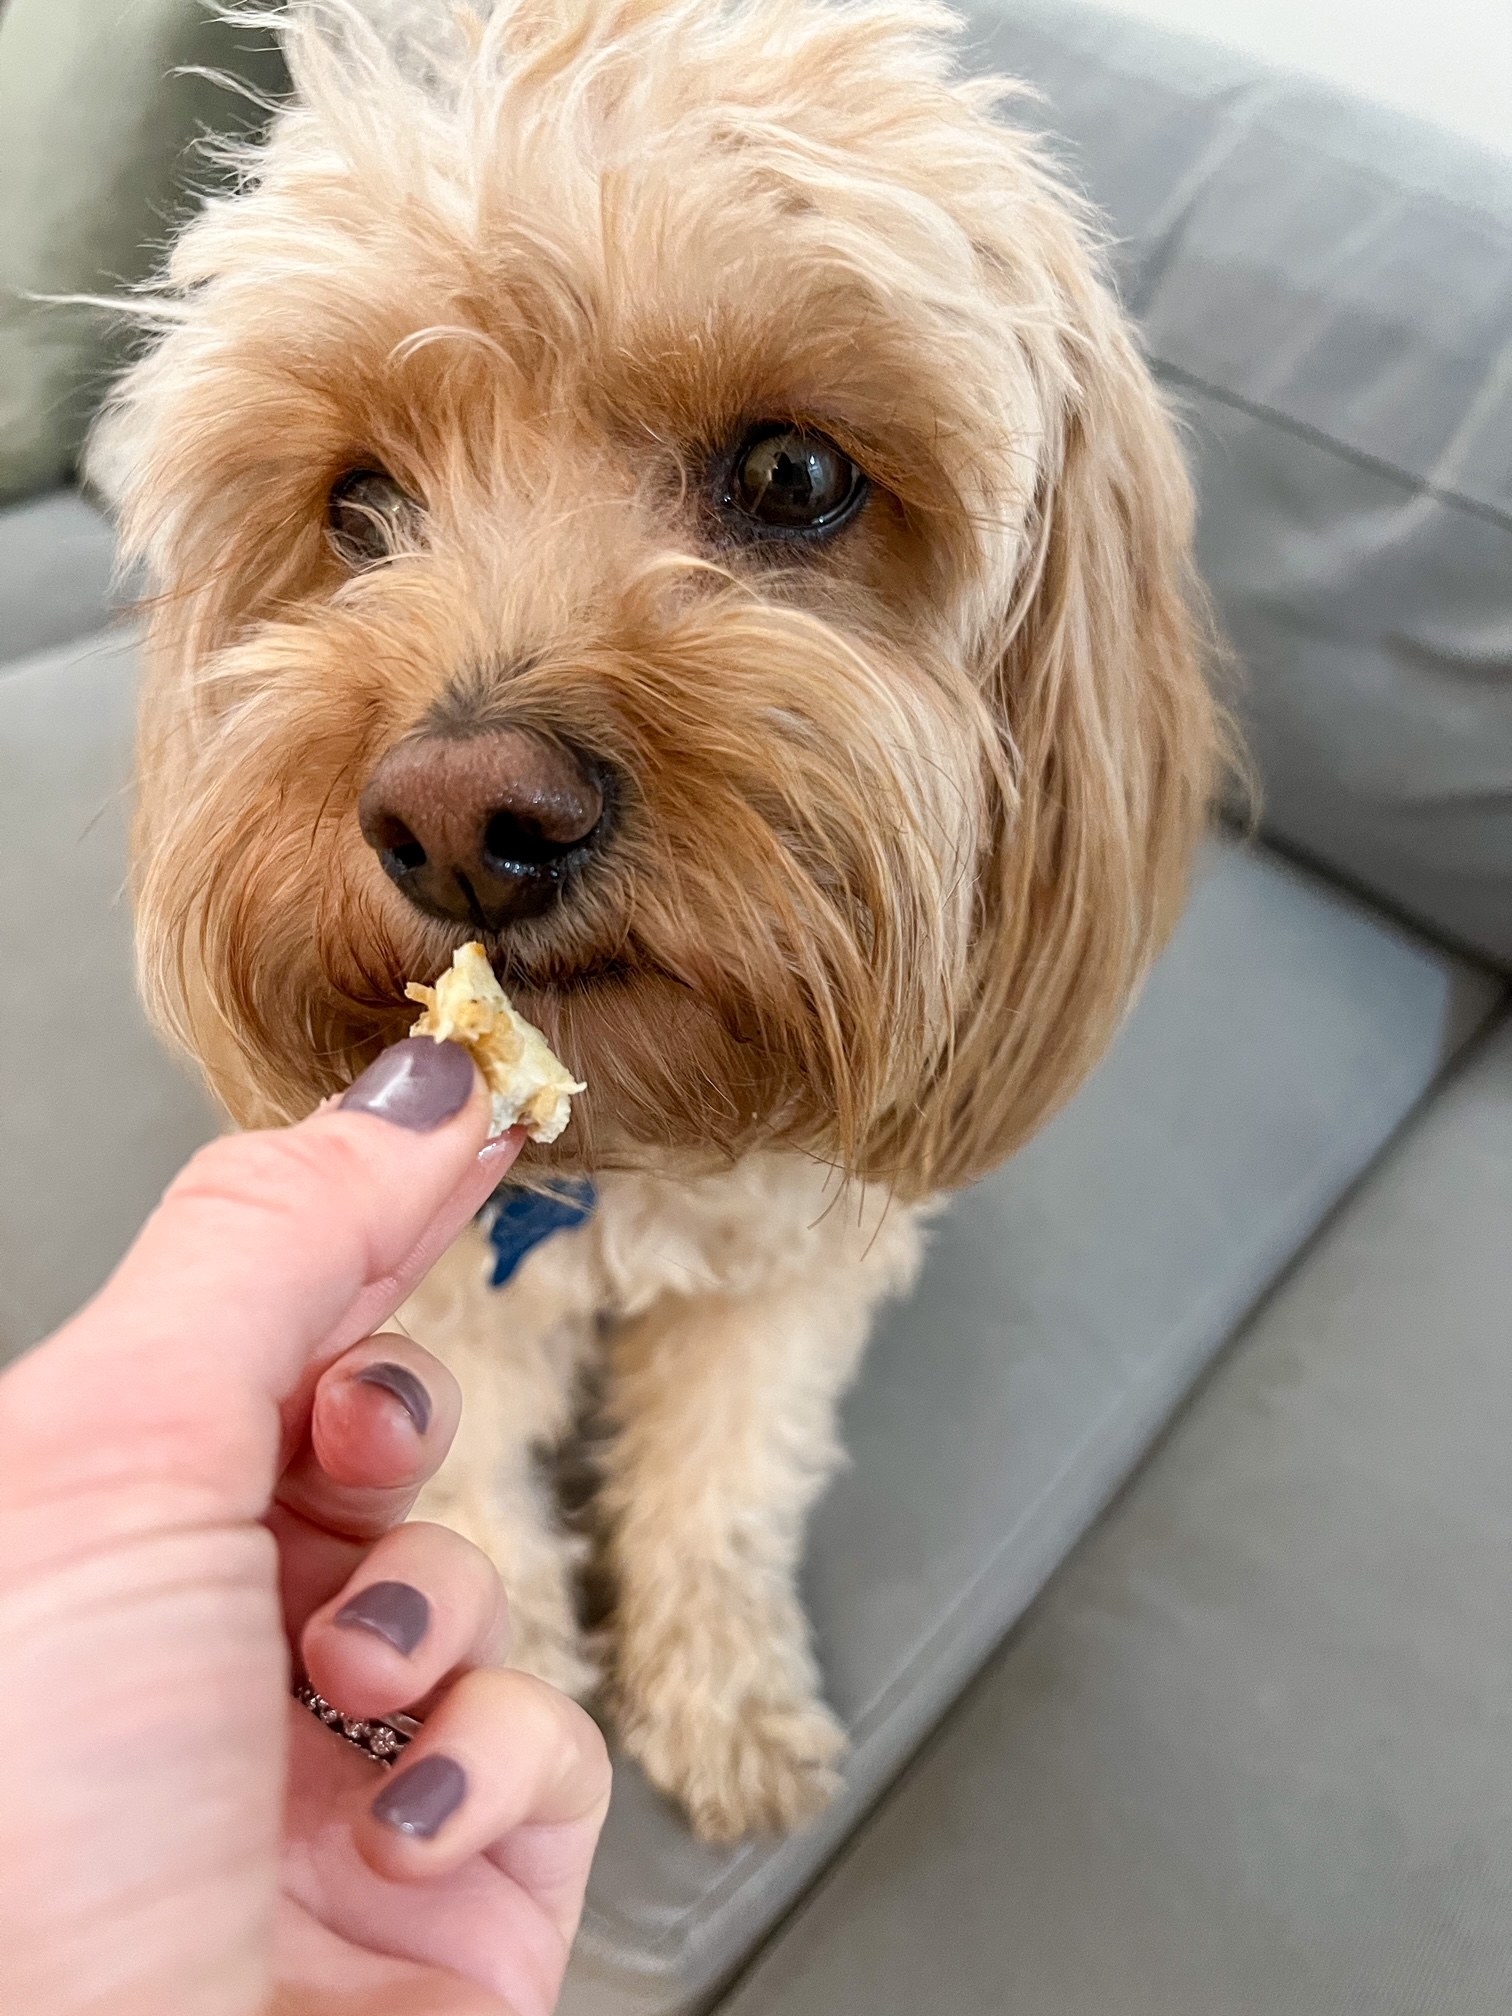 My dog eating a bite of chicken nugget.